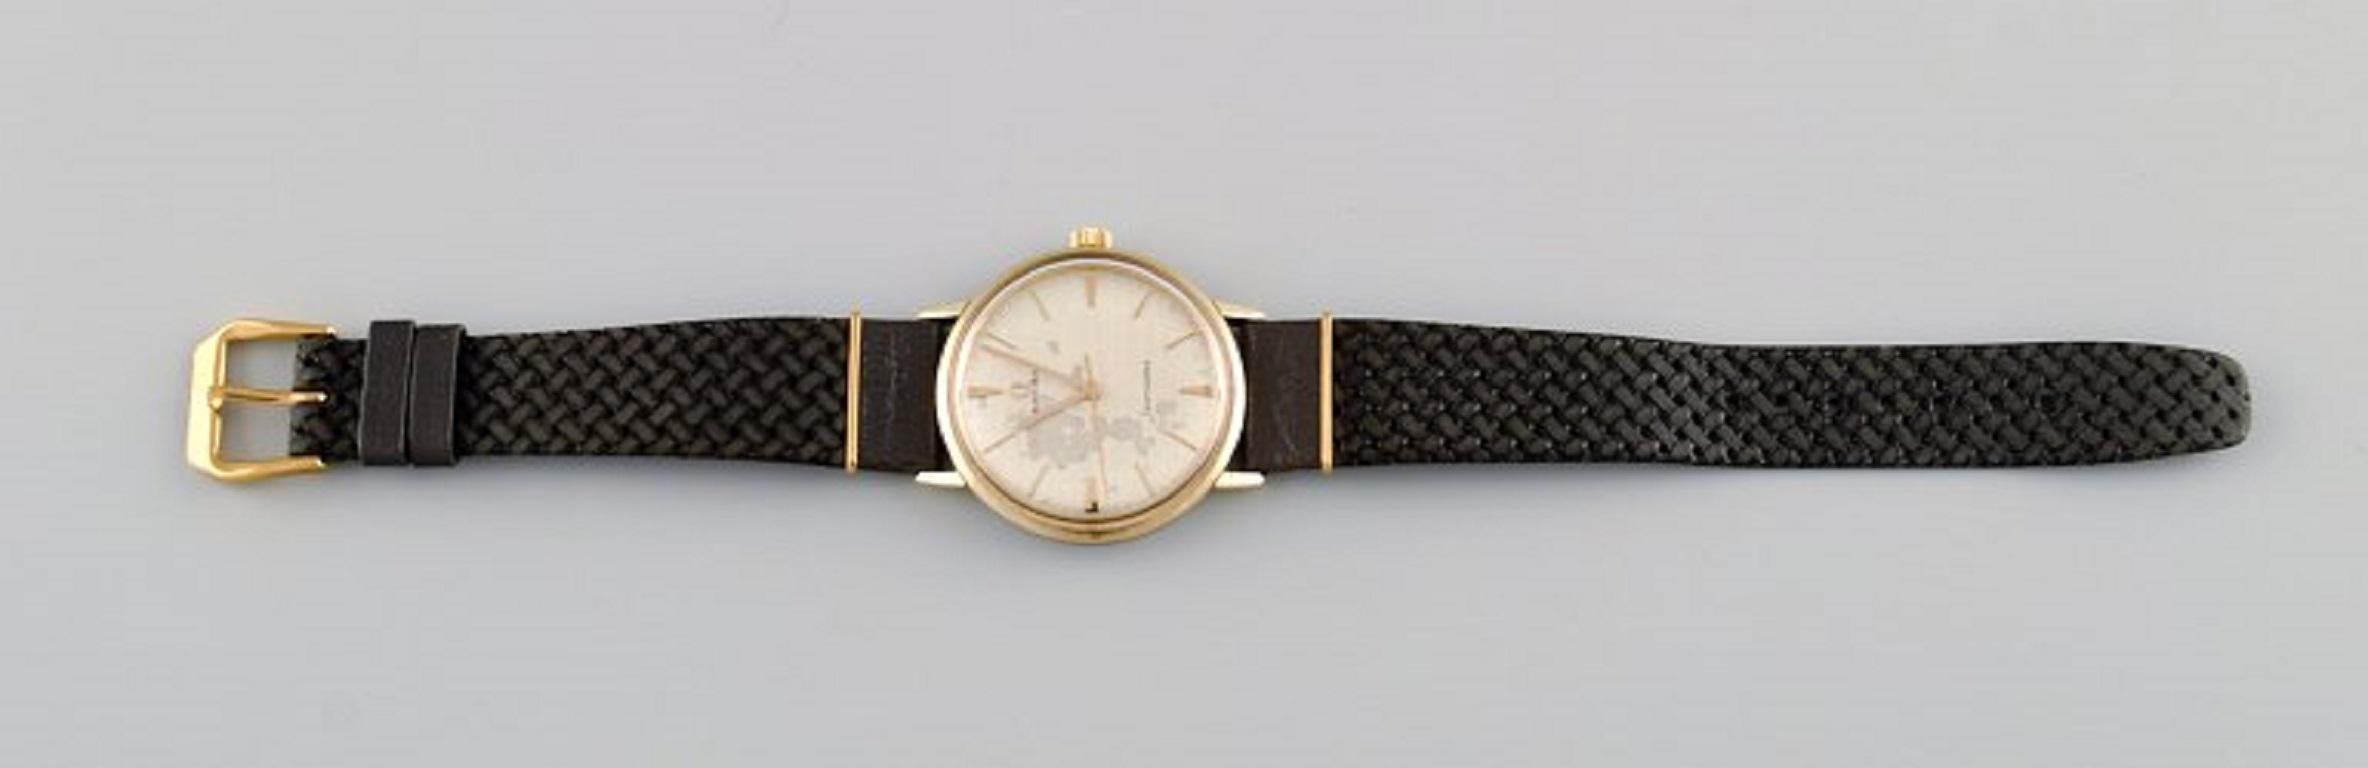 Vintage Omega Seamaster women's wristwatch. 1960s.
Case diameter: 35 mm.
In excellent condition.
Stamped.
All watches are thoroughly serviced by our professional watchmaker.